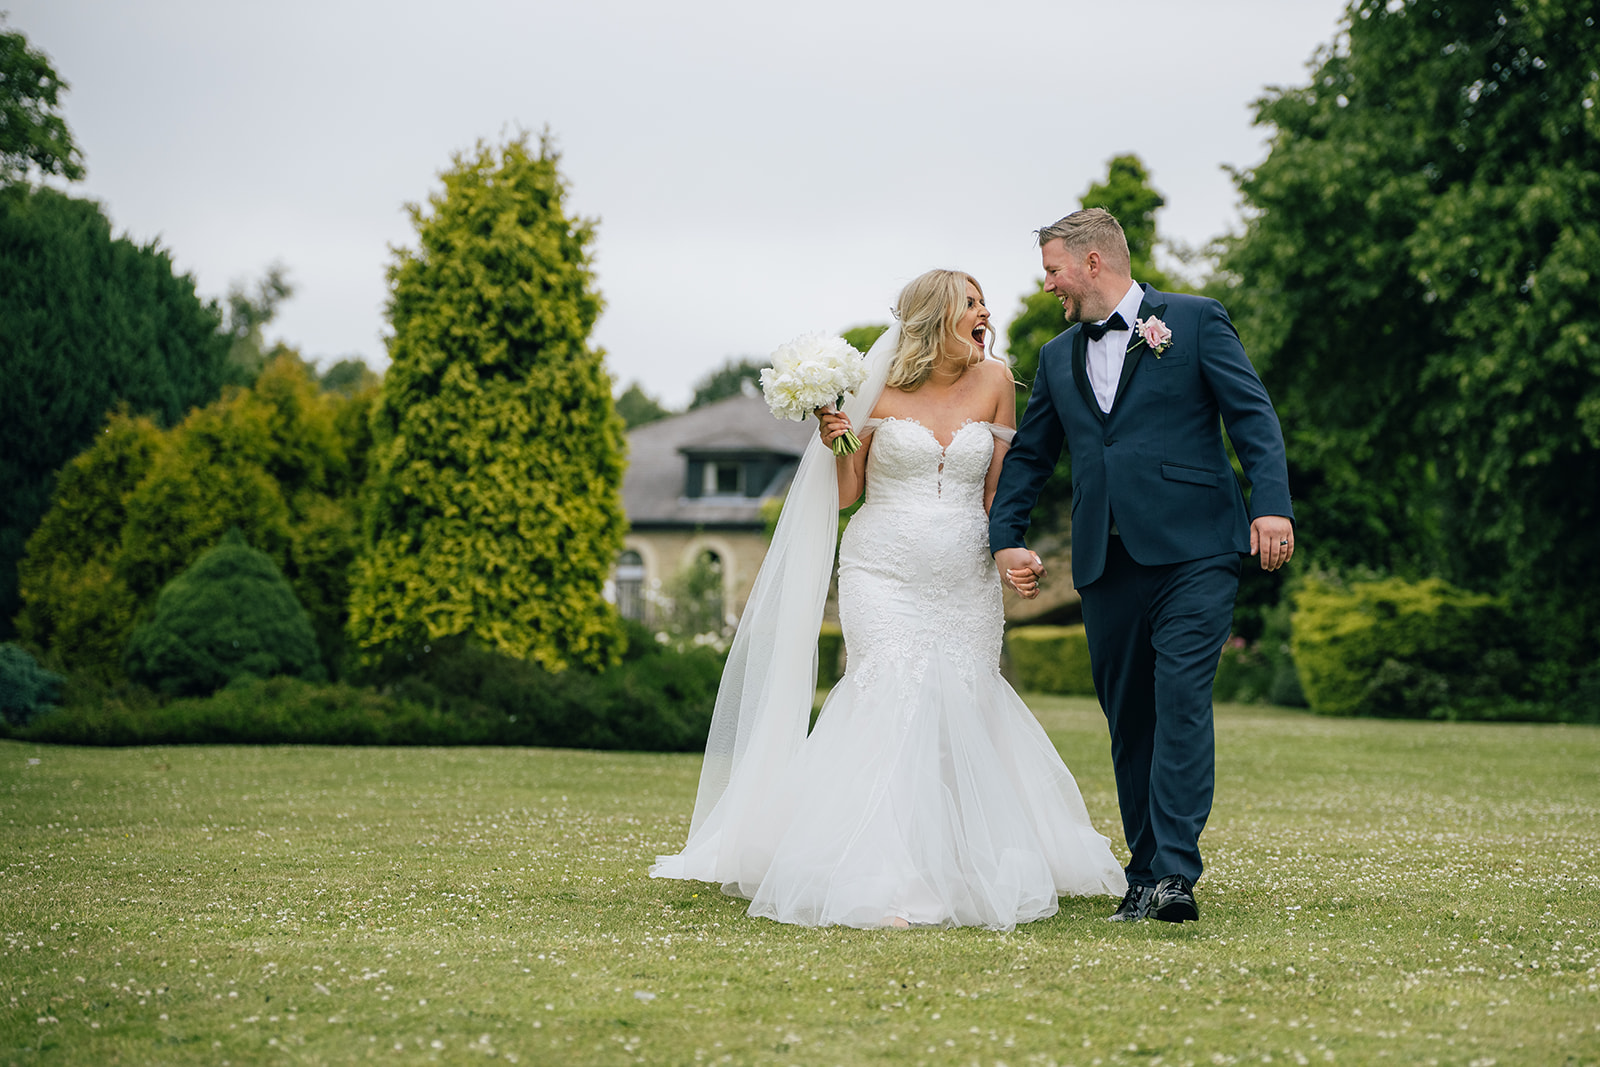 Lake District Wedding photography and videography